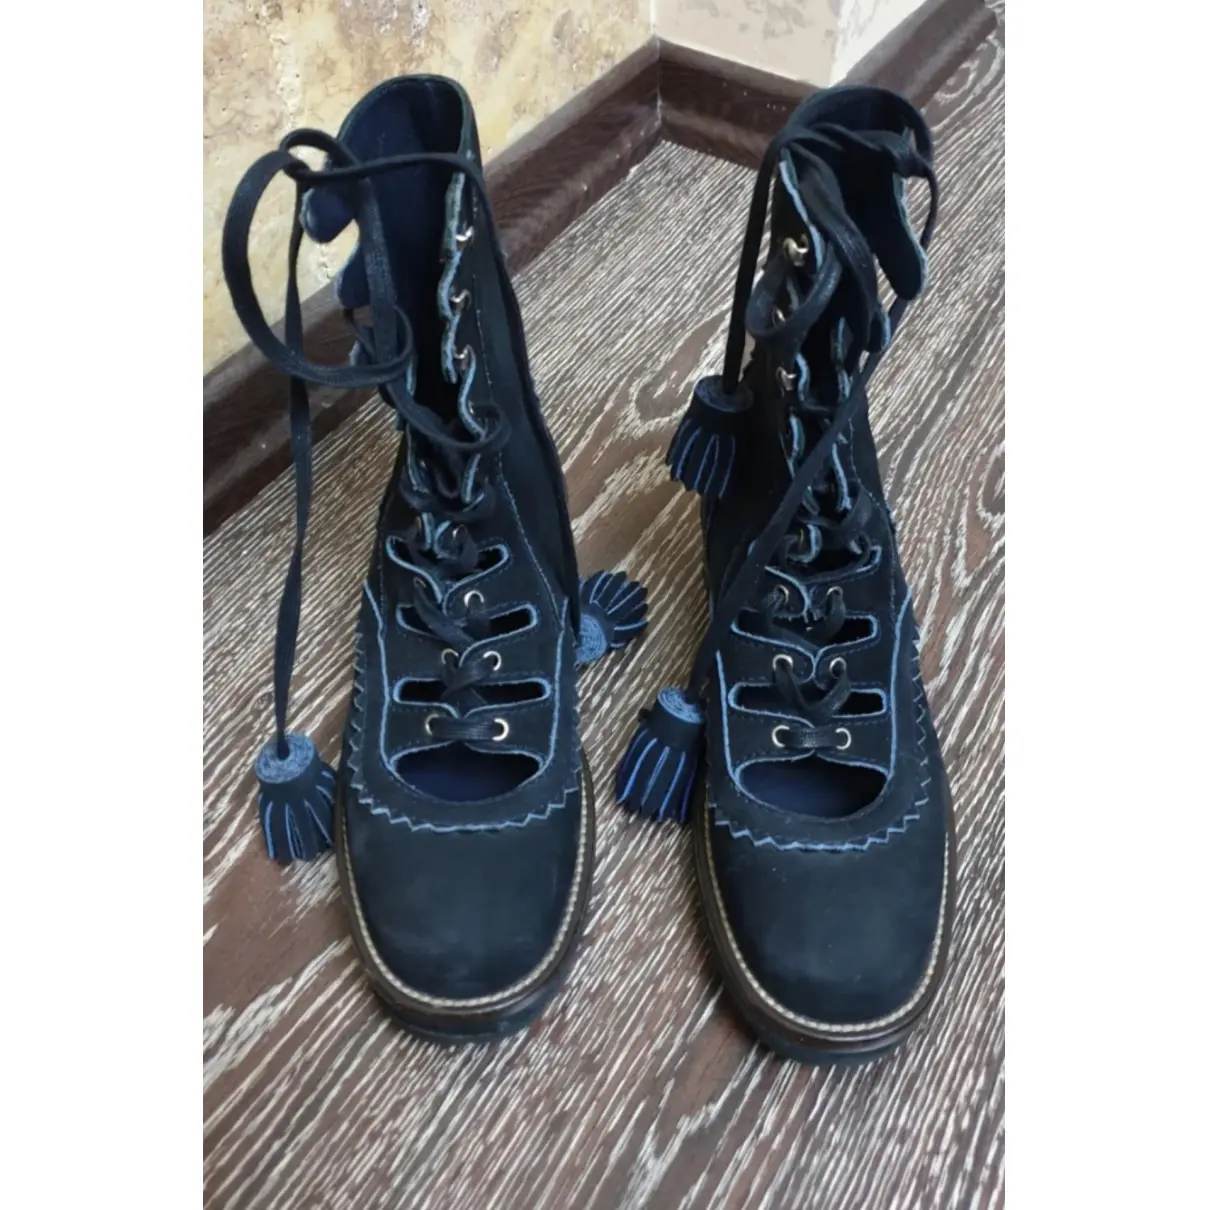 Buy Chanel Lace up boots online